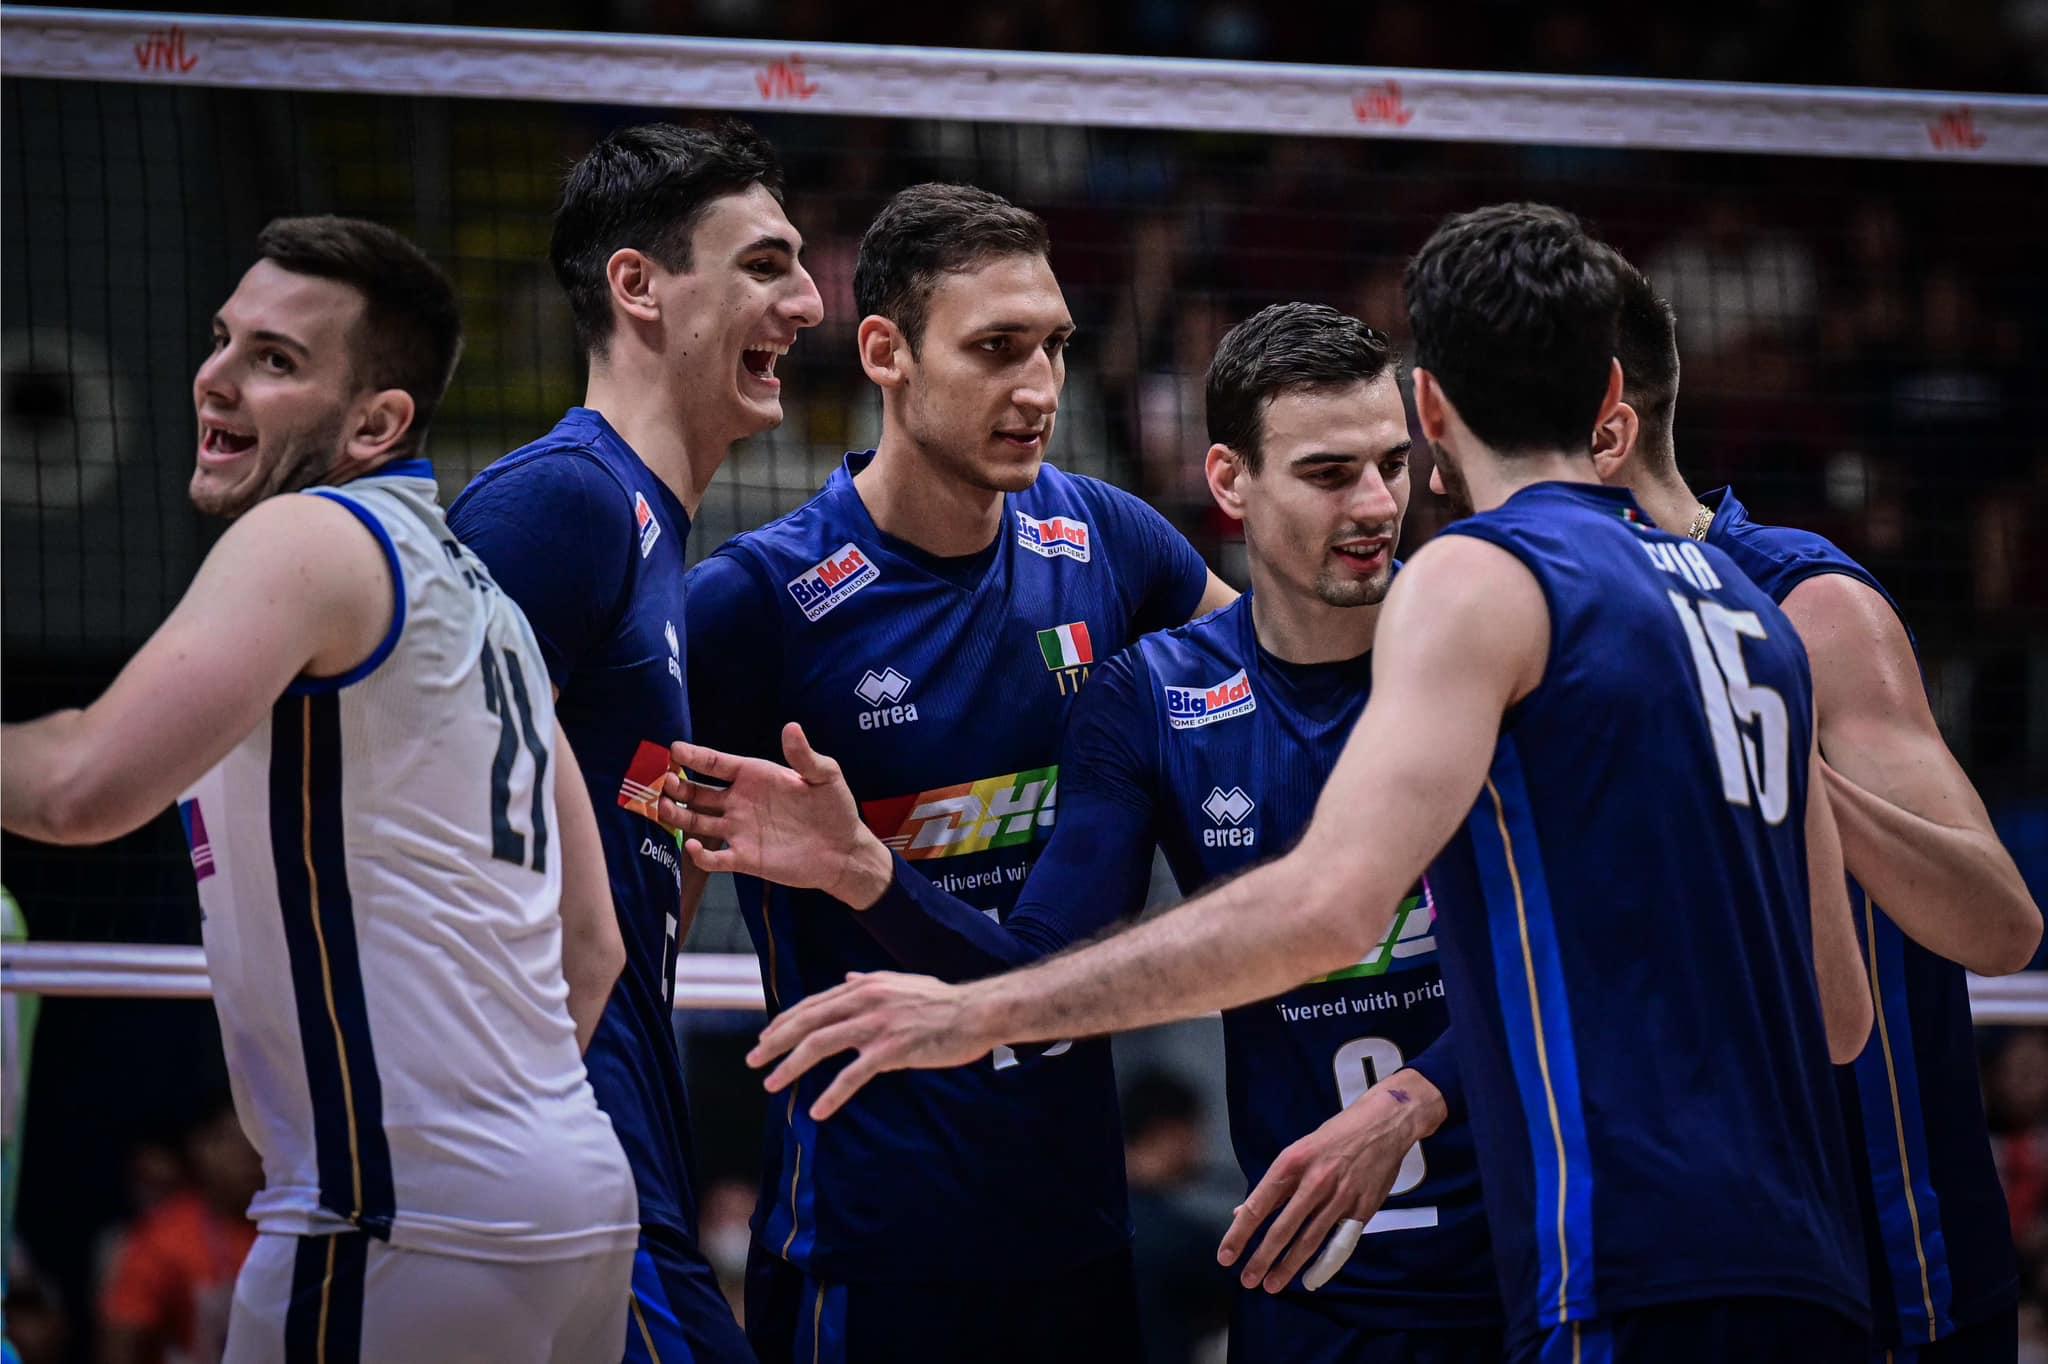 Yuri Romano steers Italy past Slovenia for third straight win in VNL GMA News Online